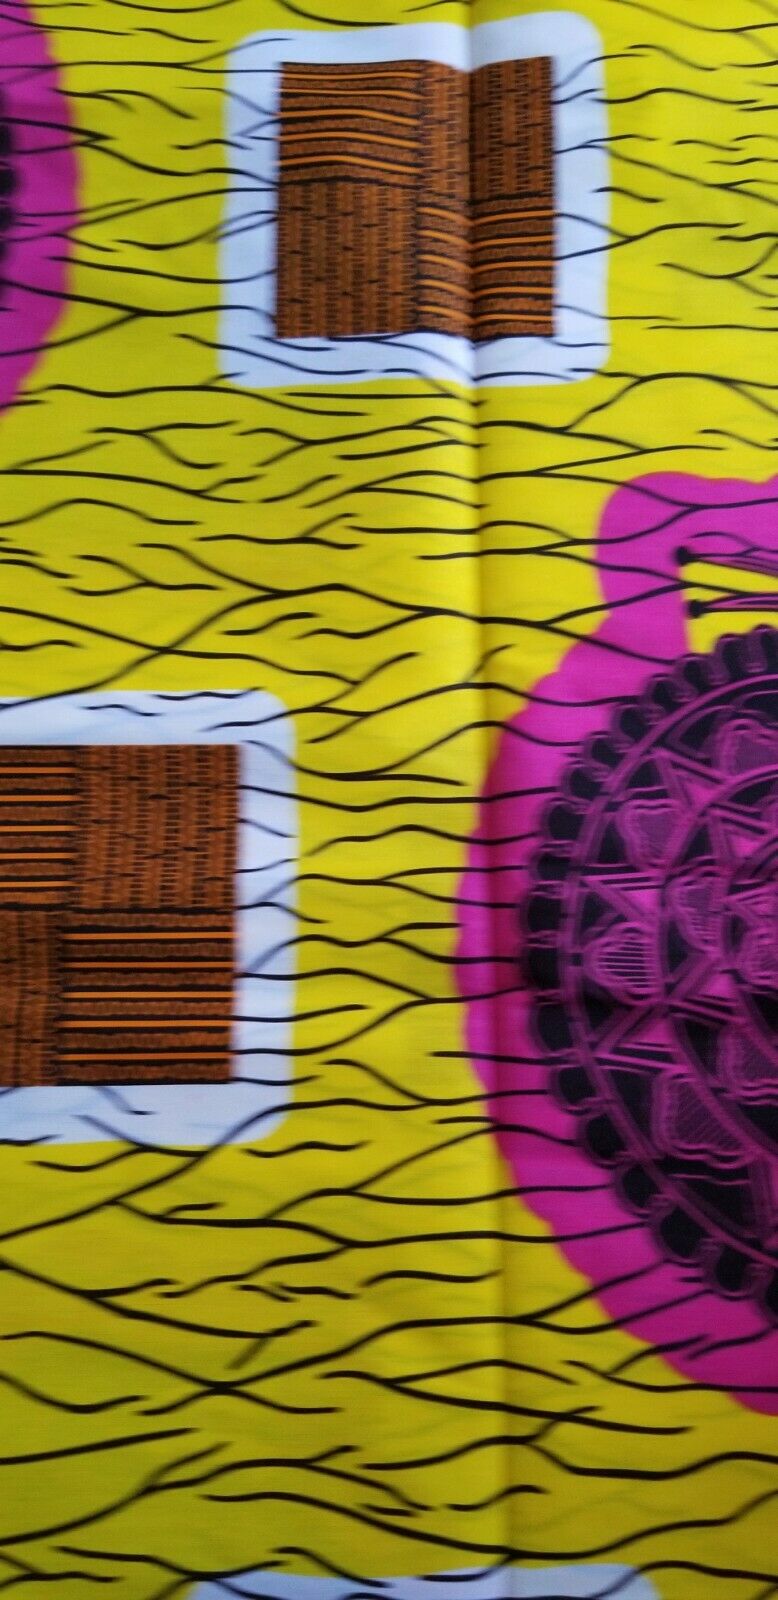 African Print Yelow multi(snails~fruitful)% Cotton Fabric 3 yds×(44 in.) ~$15.50